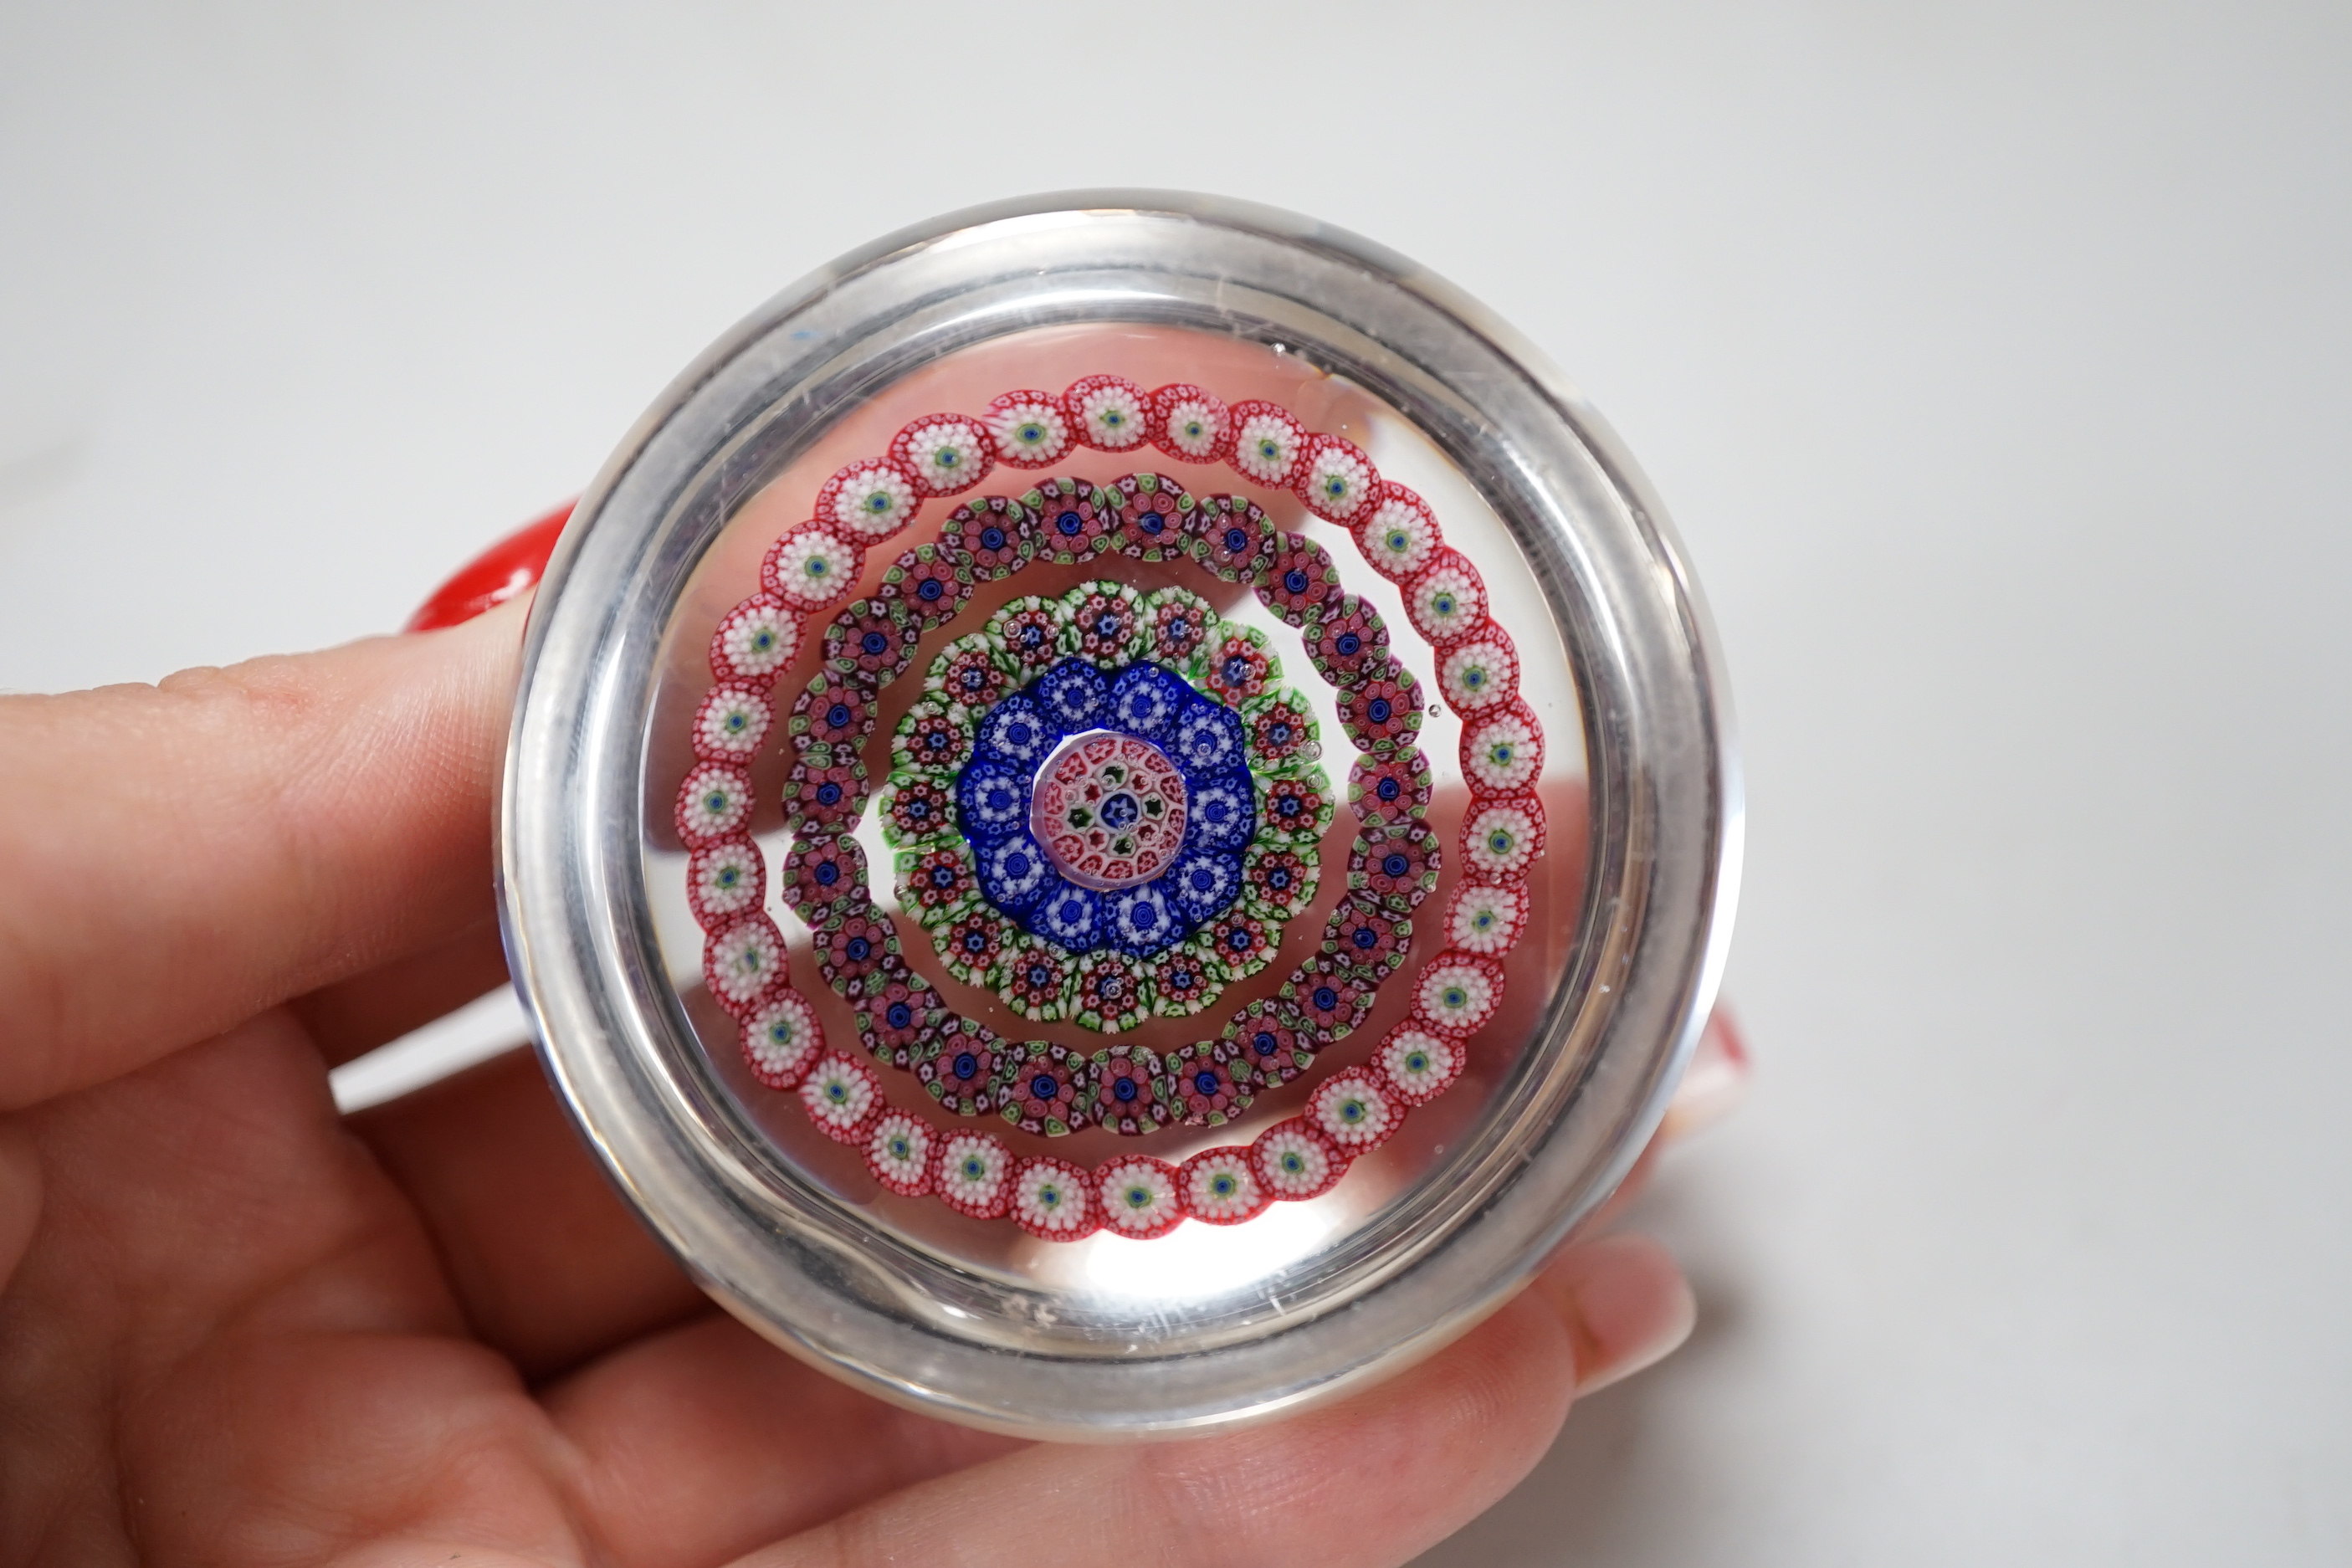 A Baccarat concentric millefleur cane paperweight, 6cm diameter